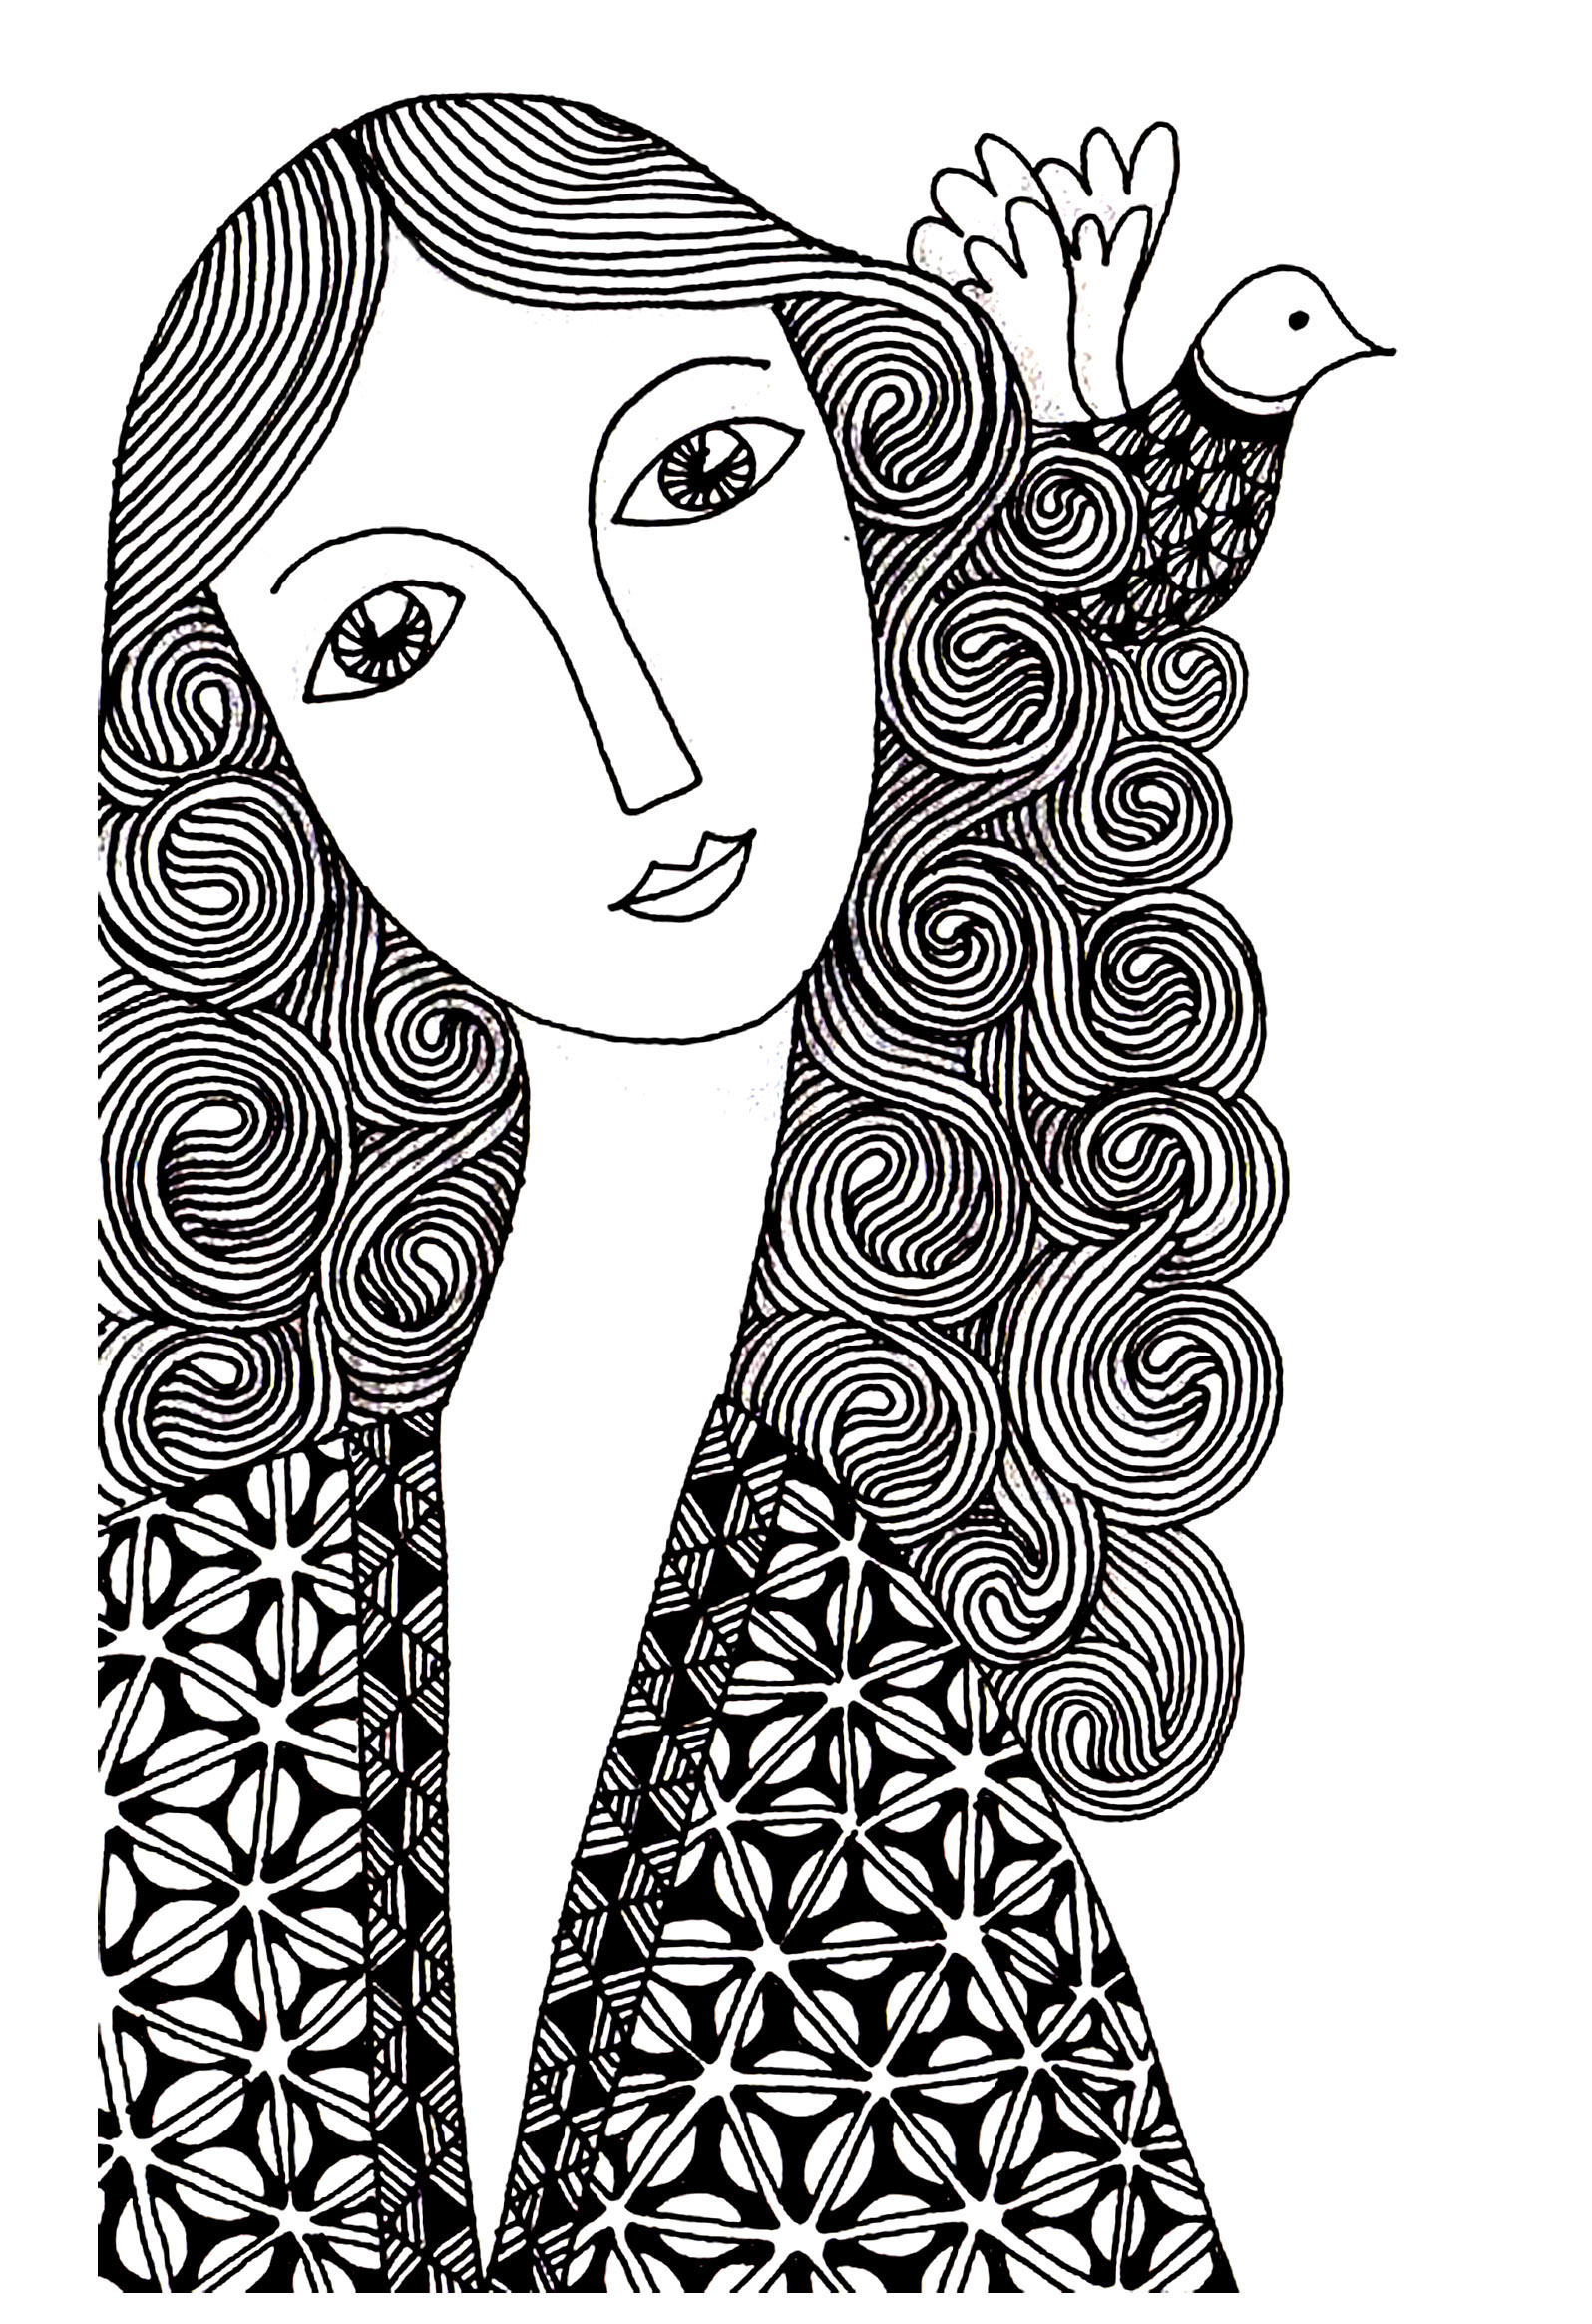 Woman simple - Unclassifiable Adult Coloring Pages